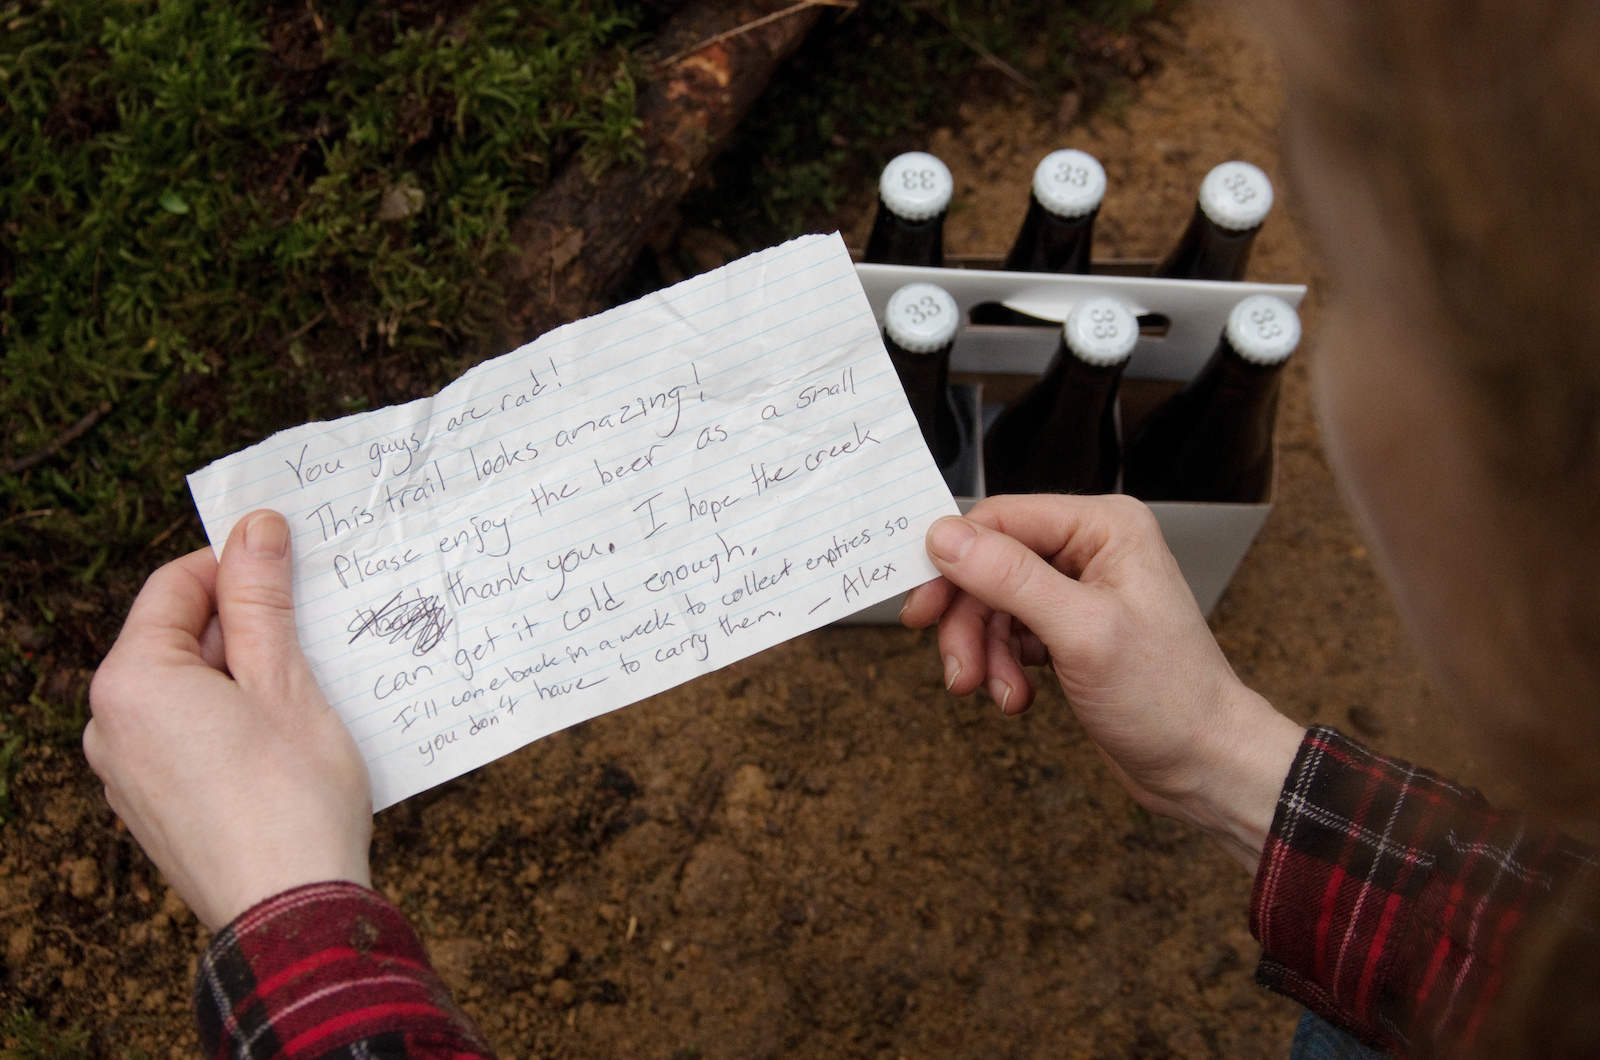 Alex and Maddy were amongst the first to discover the trail while walking their dog. This note became a special keepsake for Martin and Penny.